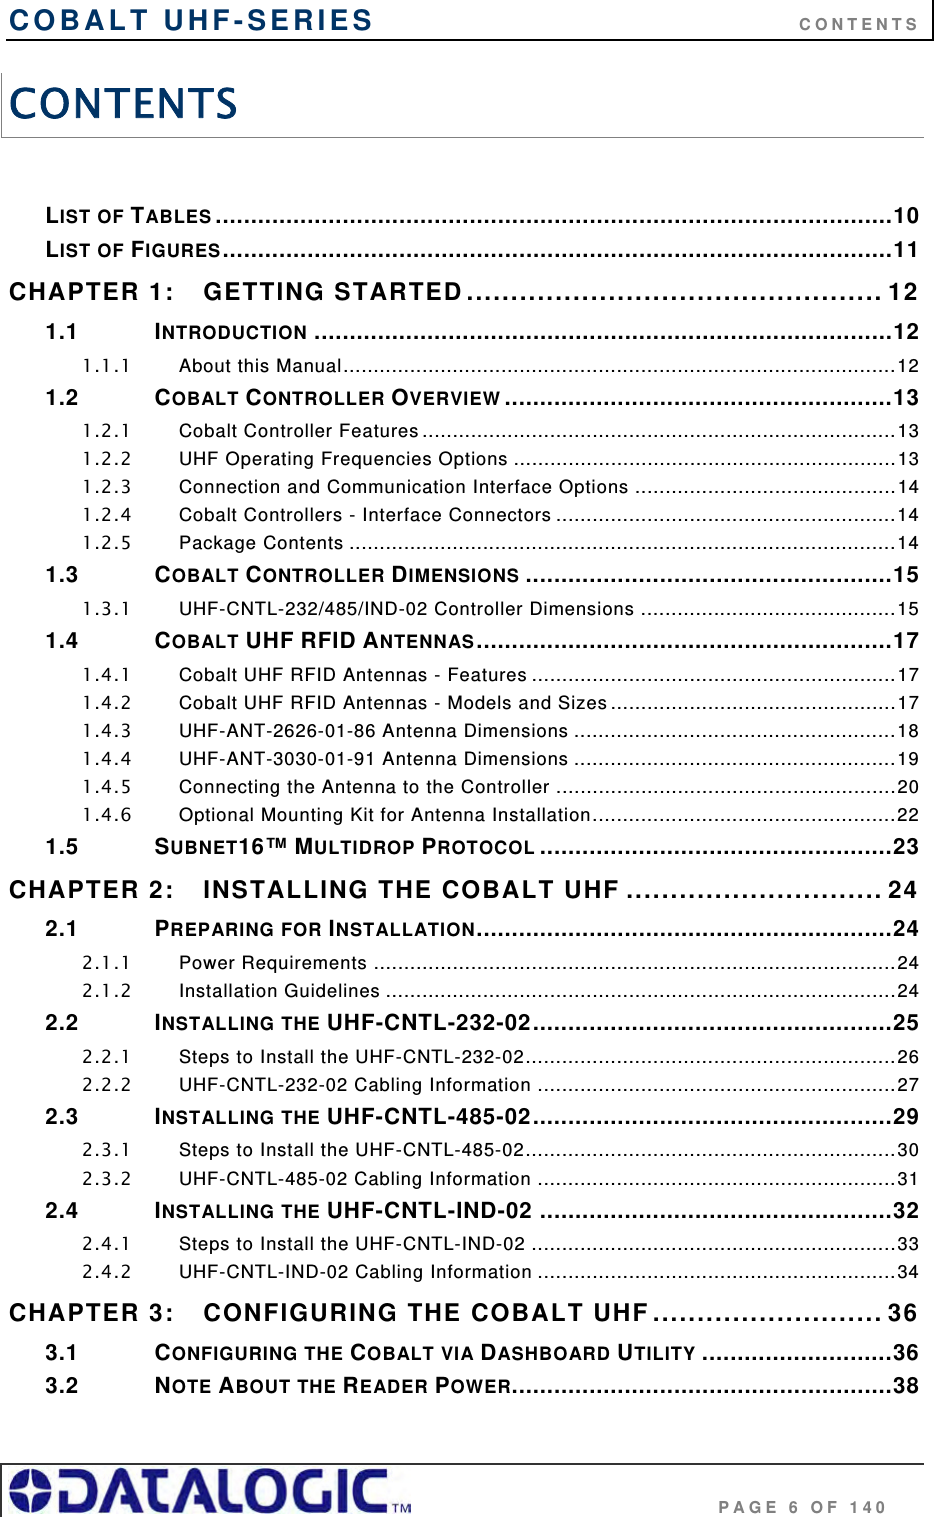 COBALT UHF-SERIES      CONTENTS                                     PAGE 6 OF 140 CONTENTS  LIST OF TABLES ................................................................................................10 LIST OF FIGURES...............................................................................................11 CHAPTER 1: GETTING STARTED............................................... 12 1.1 INTRODUCTION ..................................................................................12 1.1.1 About this Manual...........................................................................................12 1.2 COBALT CONTROLLER OVERVIEW .......................................................13 1.2.1 Cobalt Controller Features ..............................................................................13 1.2.2 UHF Operating Frequencies Options ...............................................................13 1.2.3 Connection and Communication Interface Options ...........................................14 1.2.4 Cobalt Controllers - Interface Connectors ........................................................14 1.2.5 Package Contents ..........................................................................................14 1.3 COBALT CONTROLLER DIMENSIONS ....................................................15 1.3.1 UHF-CNTL-232/485/IND-02 Controller Dimensions ..........................................15 1.4 COBALT UHF RFID ANTENNAS...........................................................17 1.4.1 Cobalt UHF RFID Antennas - Features ............................................................17 1.4.2 Cobalt UHF RFID Antennas - Models and Sizes ...............................................17 1.4.3 UHF-ANT-2626-01-86 Antenna Dimensions .....................................................18 1.4.4 UHF-ANT-3030-01-91 Antenna Dimensions .....................................................19 1.4.5 Connecting the Antenna to the Controller ........................................................20 1.4.6 Optional Mounting Kit for Antenna Installation..................................................22 1.5 SUBNET16™ MULTIDROP PROTOCOL ..................................................23 CHAPTER 2: INSTALLING THE COBALT UHF ............................. 24 2.1 PREPARING FOR INSTALLATION...........................................................24 2.1.1 Power Requirements ......................................................................................24 2.1.2 Installation Guidelines ....................................................................................24 2.2 INSTALLING THE UHF-CNTL-232-02...................................................25 2.2.1 Steps to Install the UHF-CNTL-232-02.............................................................26 2.2.2 UHF-CNTL-232-02 Cabling Information ...........................................................27 2.3 INSTALLING THE UHF-CNTL-485-02...................................................29 2.3.1 Steps to Install the UHF-CNTL-485-02.............................................................30 2.3.2 UHF-CNTL-485-02 Cabling Information ...........................................................31 2.4 INSTALLING THE UHF-CNTL-IND-02 ..................................................32 2.4.1 Steps to Install the UHF-CNTL-IND-02 ............................................................33 2.4.2 UHF-CNTL-IND-02 Cabling Information ...........................................................34 CHAPTER 3: CONFIGURING THE COBALT UHF.......................... 36 3.1 CONFIGURING THE COBALT VIA DASHBOARD UTILITY ...........................36 3.2 NOTE ABOUT THE READER POWER......................................................38 